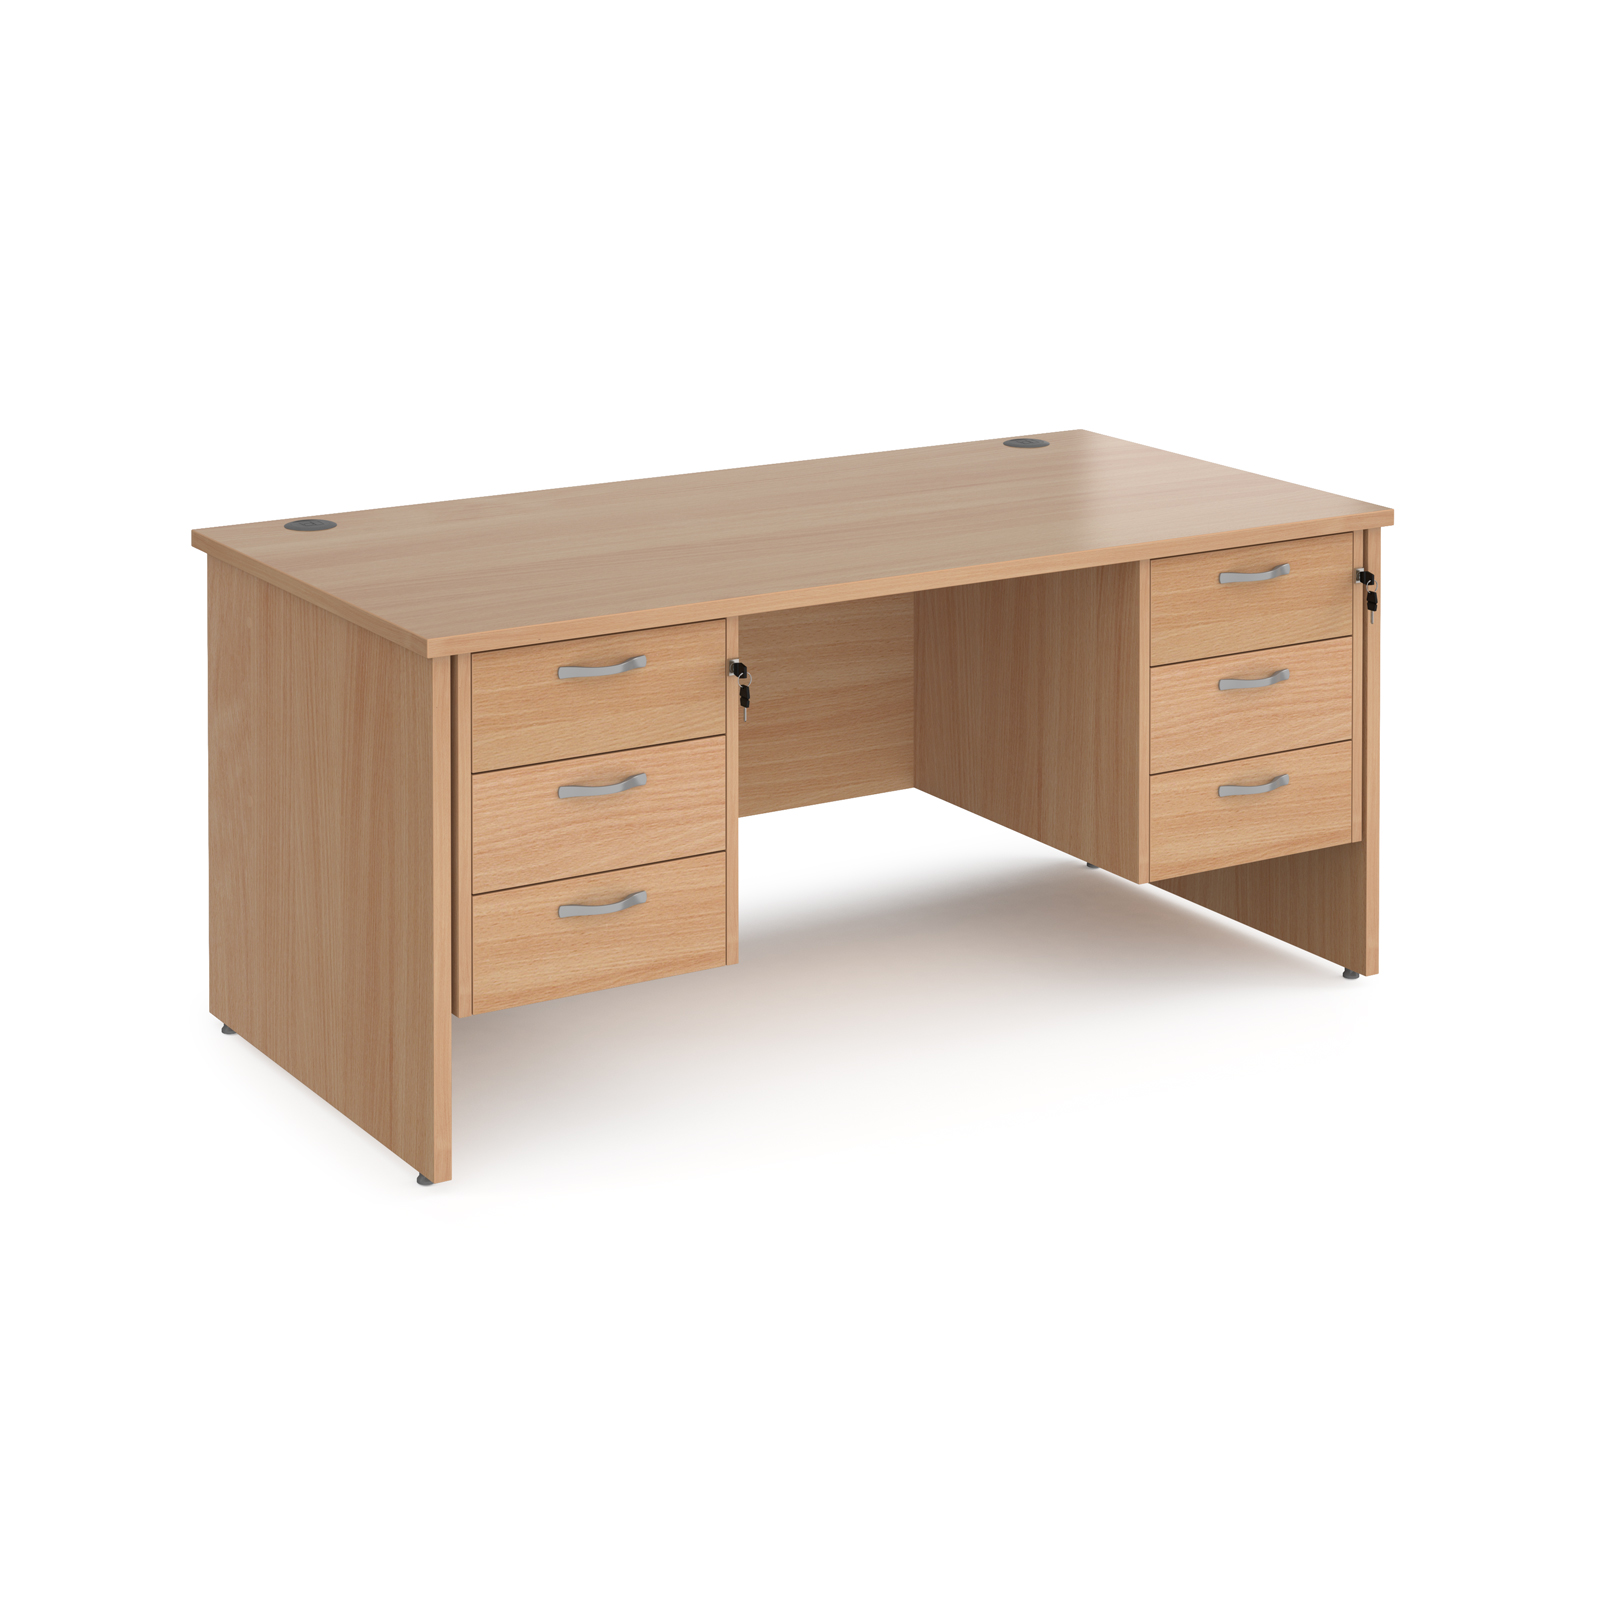 Maestro 25 straight desk 1600mm x 800mm with two x 3 drawer pedestals - beech top with panel end leg